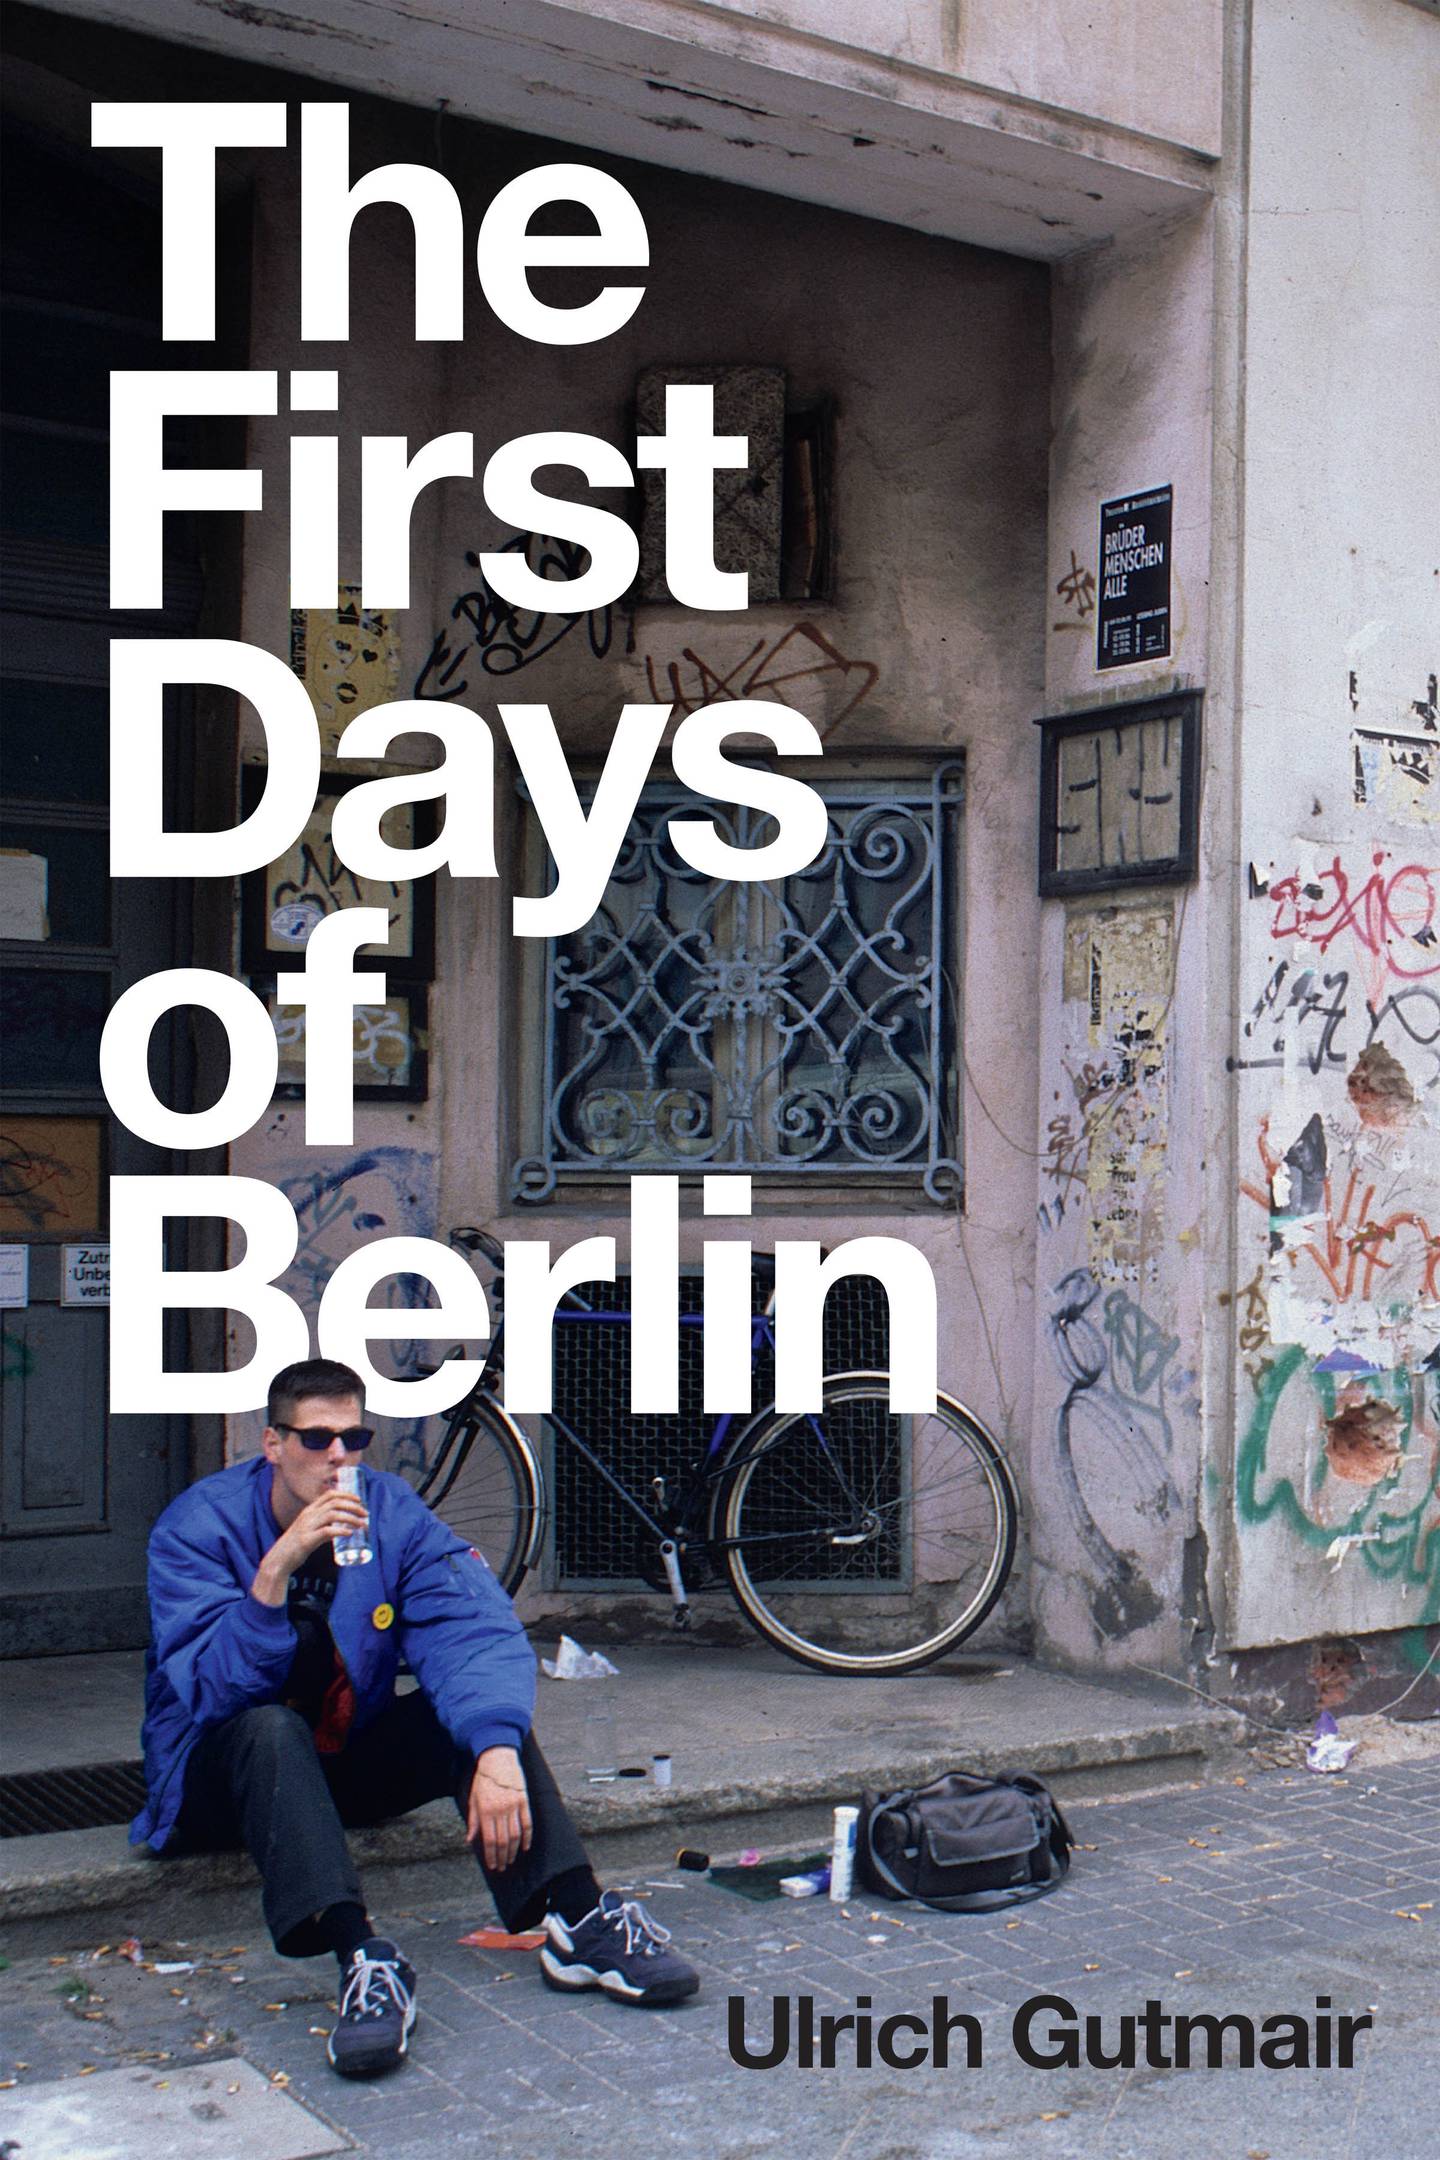 Ulrich Gutmair's 'The First Days of Berlin' comes out on January 4, 2022. Photo: Polity